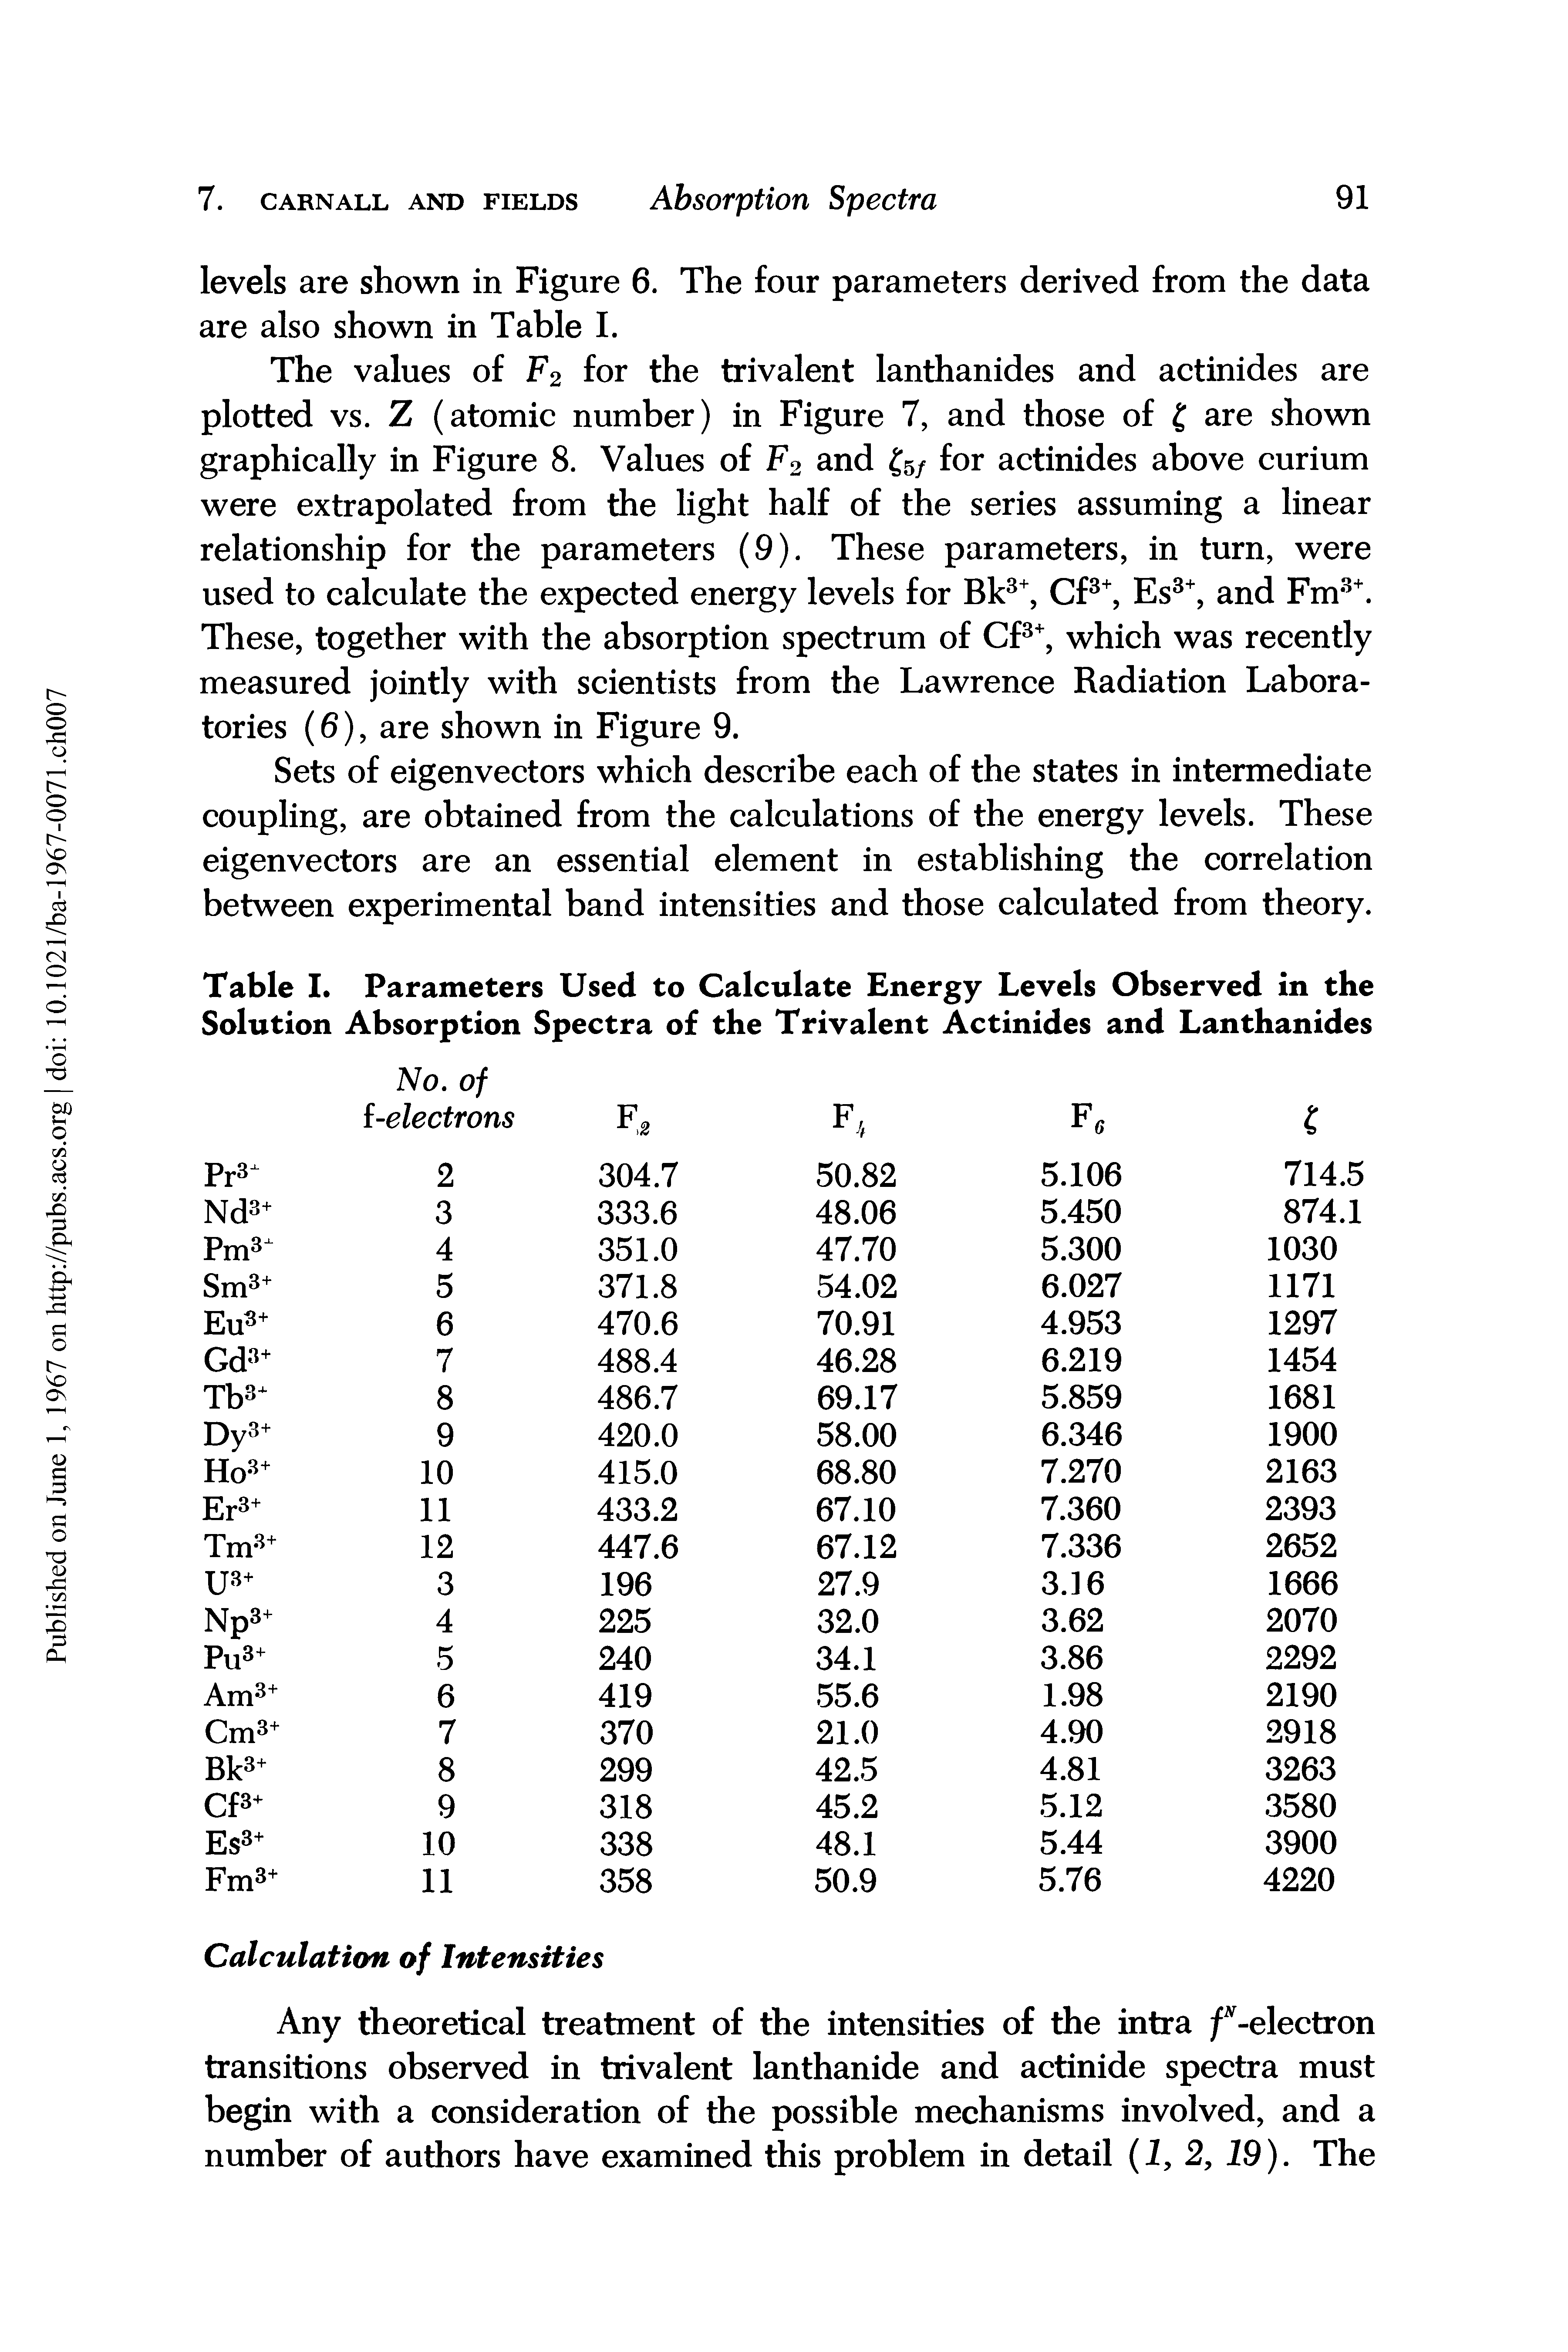 Table I. Parameters Used to Calculate Energy Levels Observed in the Solution Absorption Spectra of the Trivalent Actinides and Lanthanides...